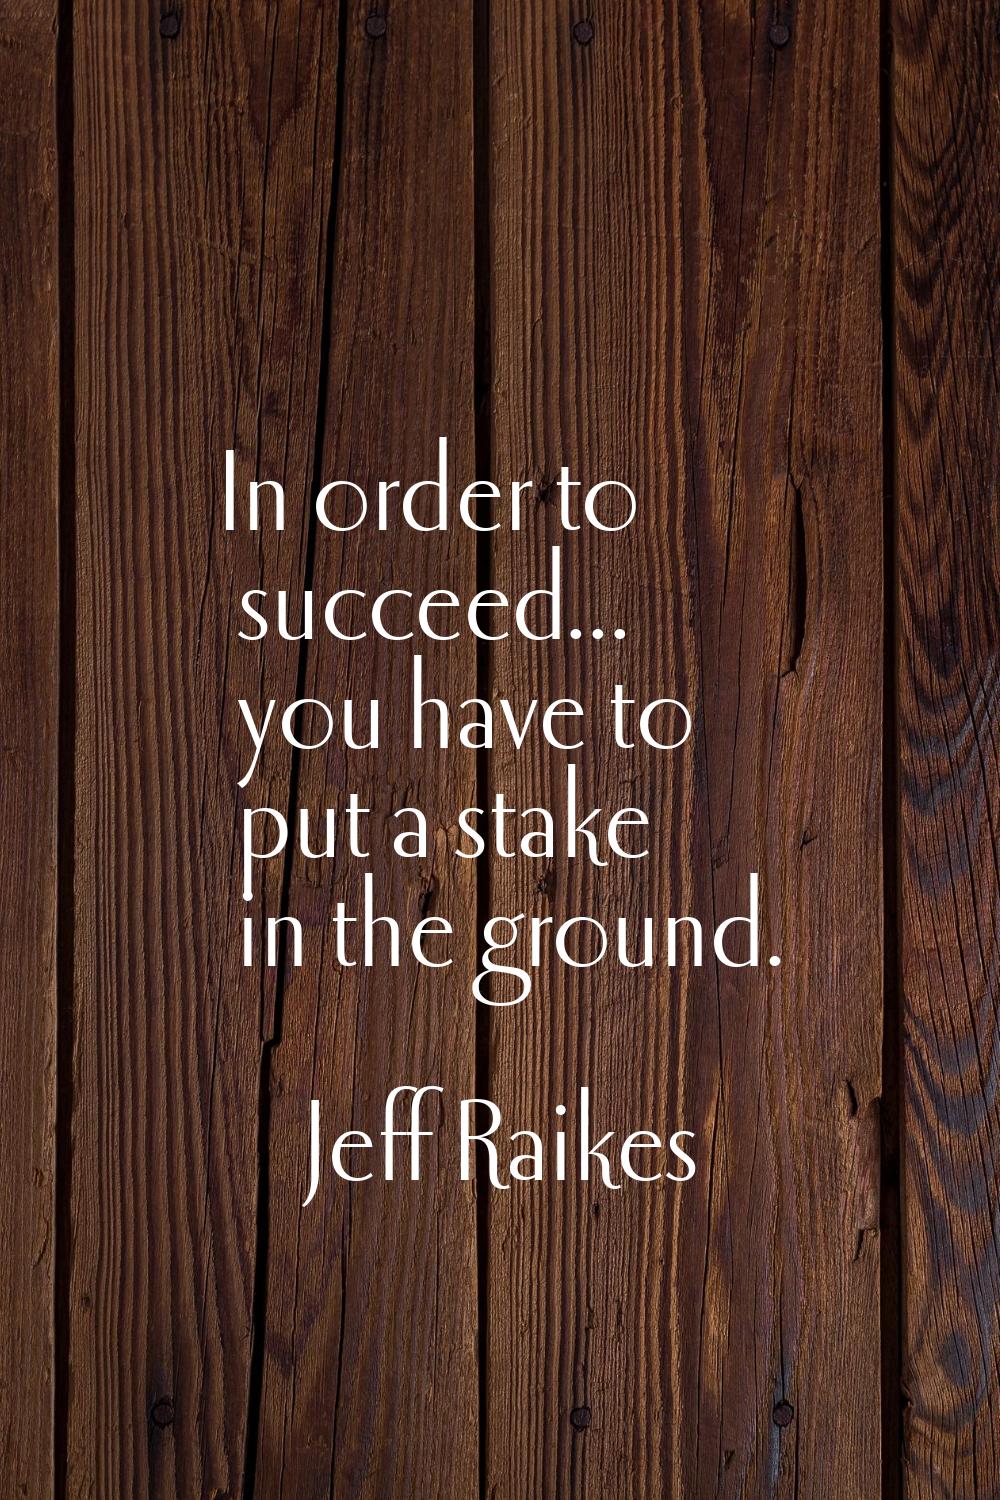 In order to succeed... you have to put a stake in the ground.